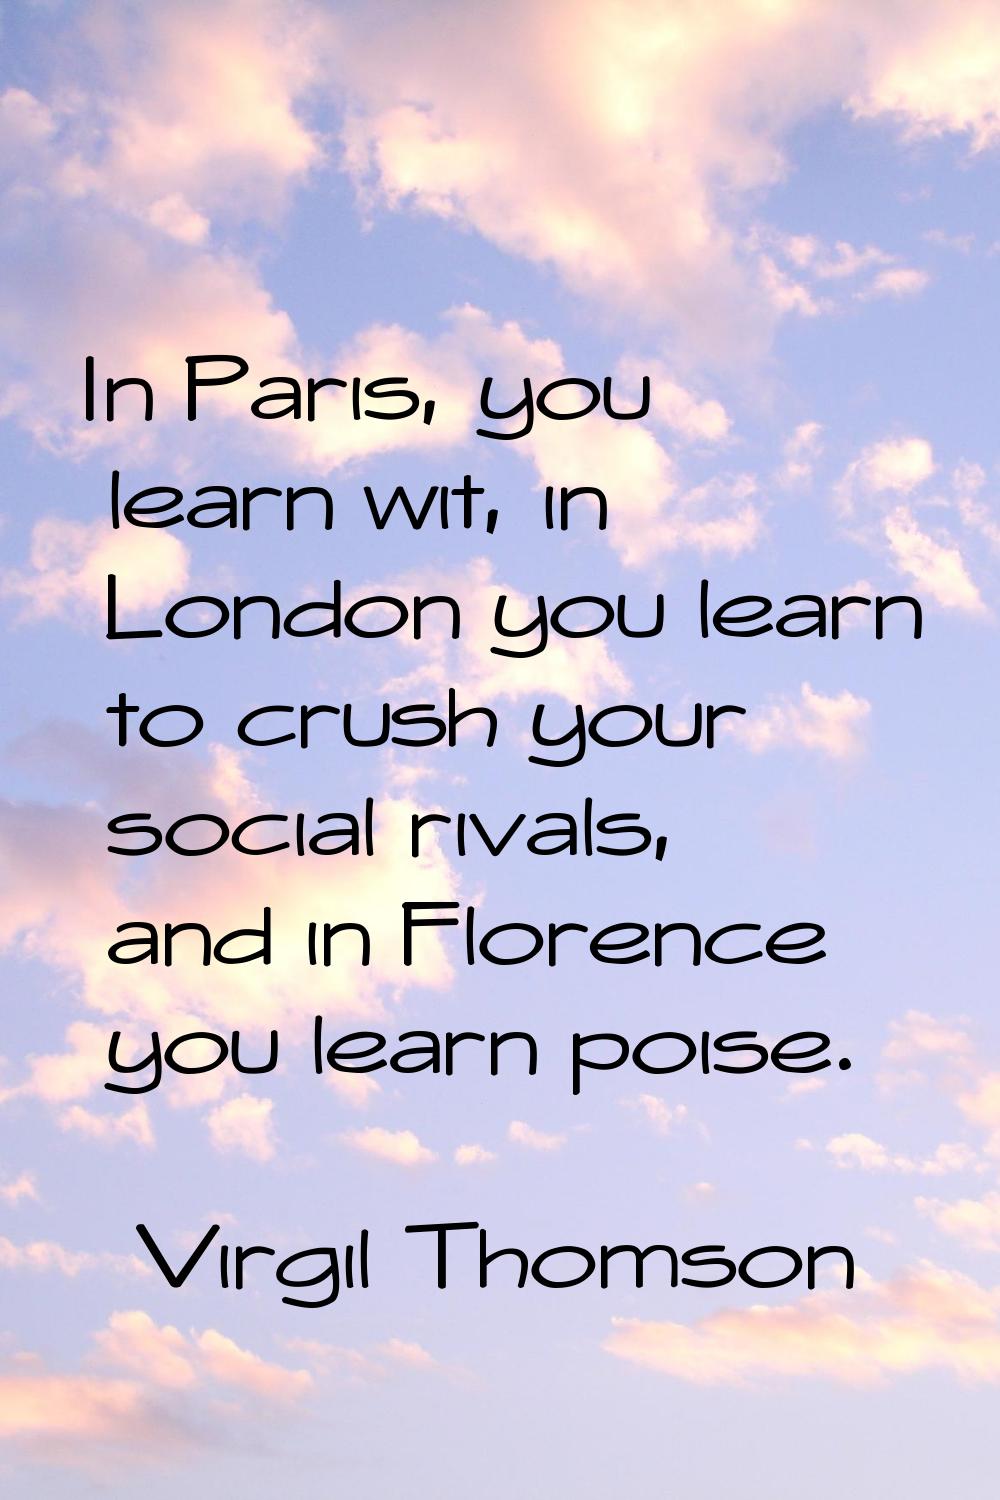 In Paris, you learn wit, in London you learn to crush your social rivals, and in Florence you learn